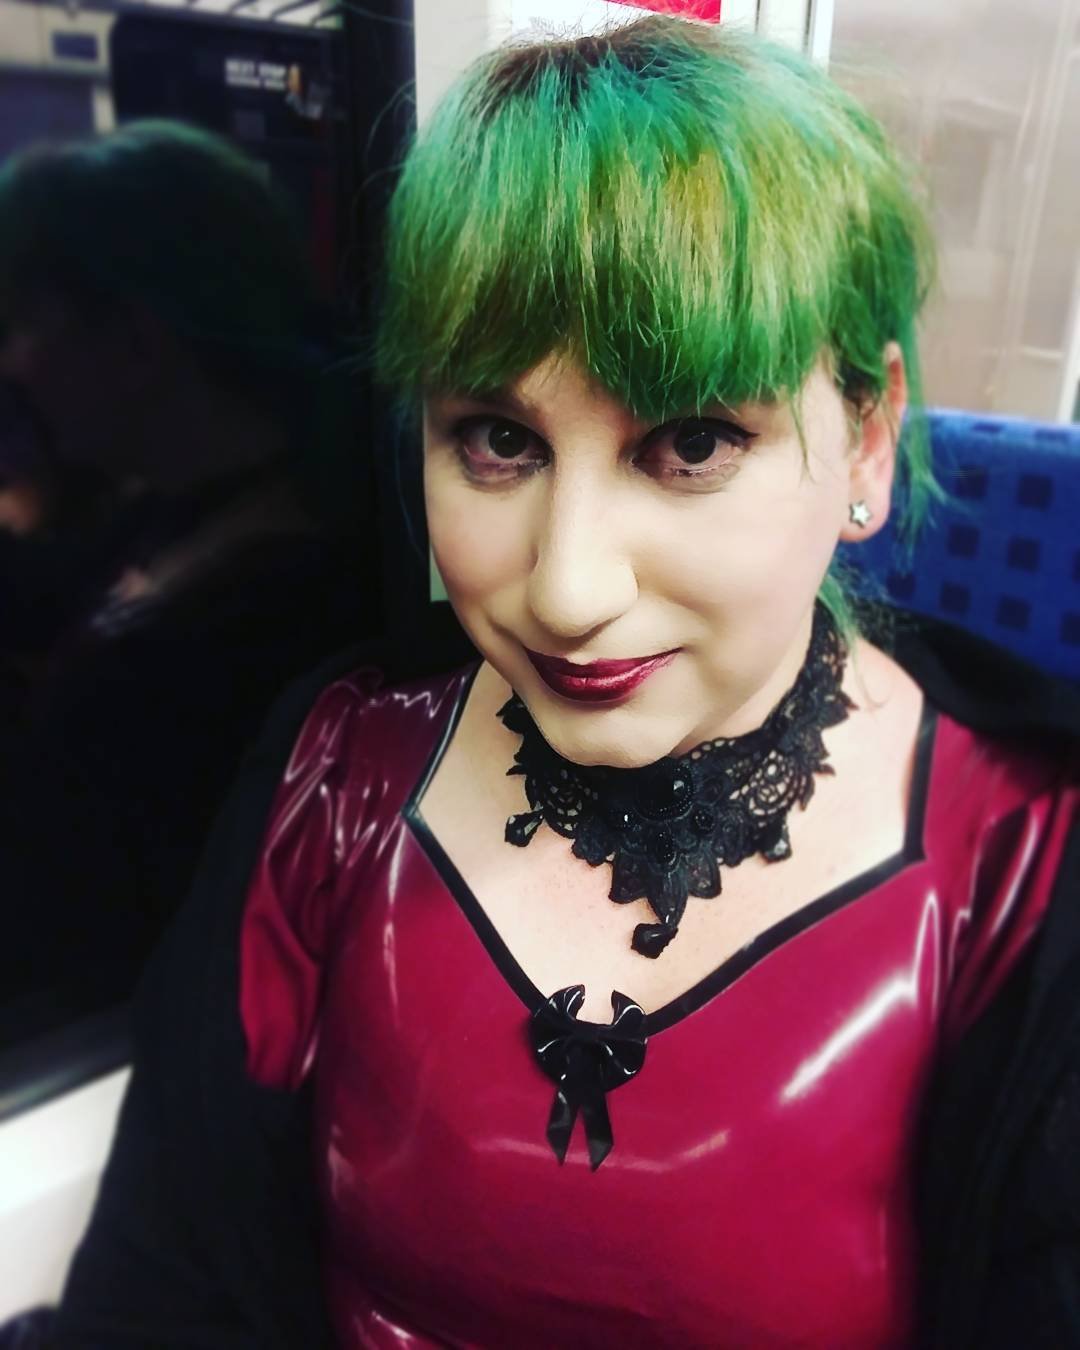 Maggie De Luchs on Instagram: Wearing latex casually on the train